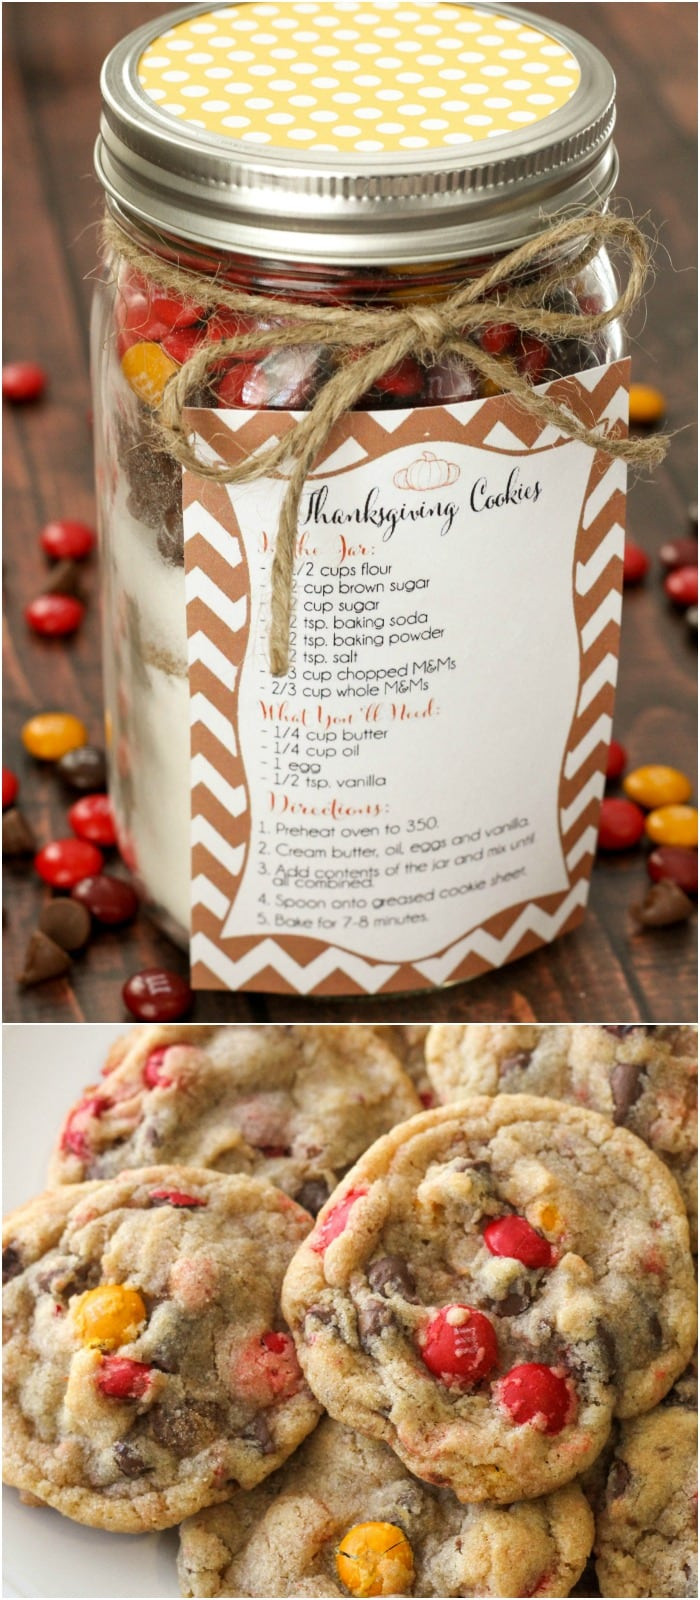 Cute Thanksgiving Gifts
 Thanksgiving Cookie Jar Gift